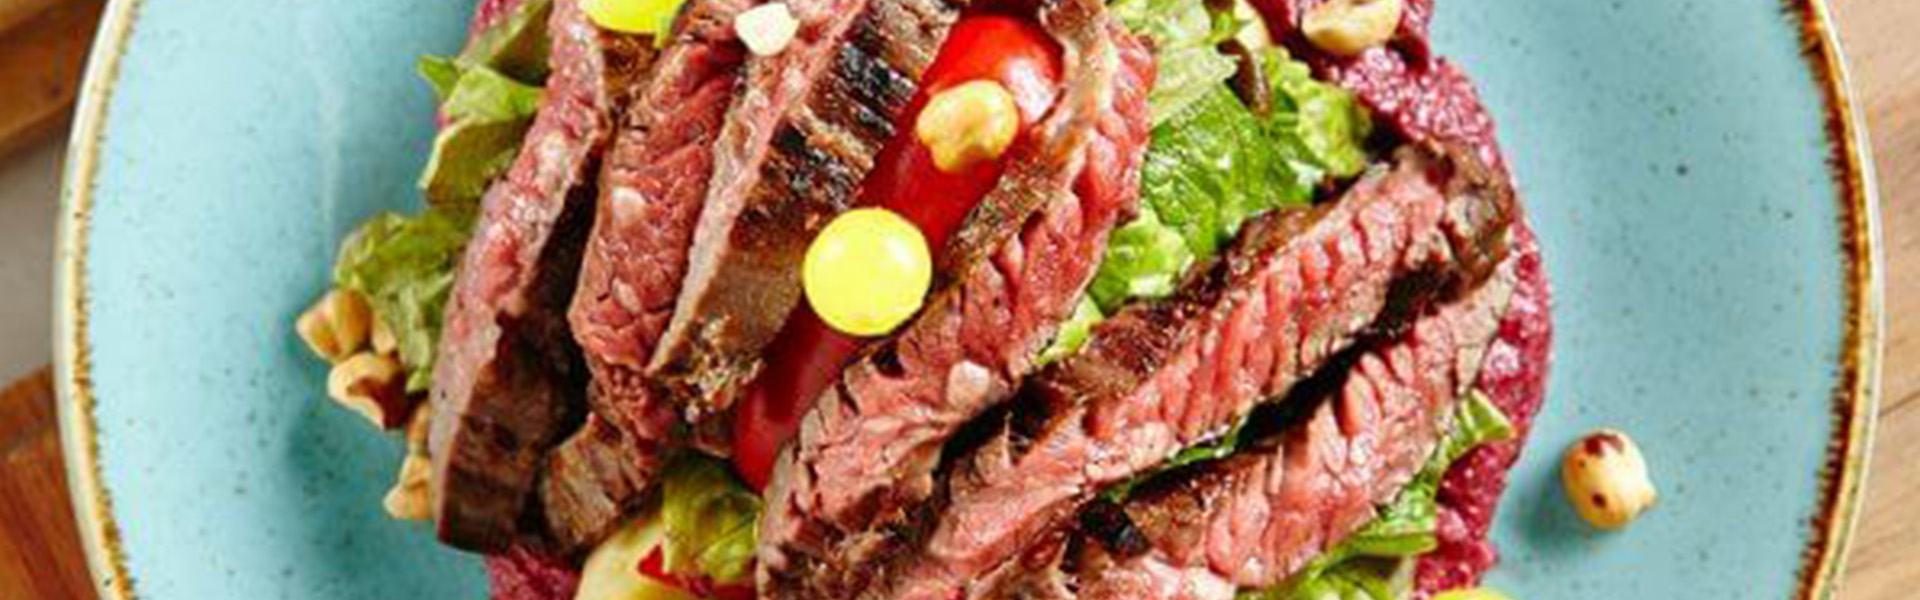 Grilled Steak Salad with Beets and Scallions